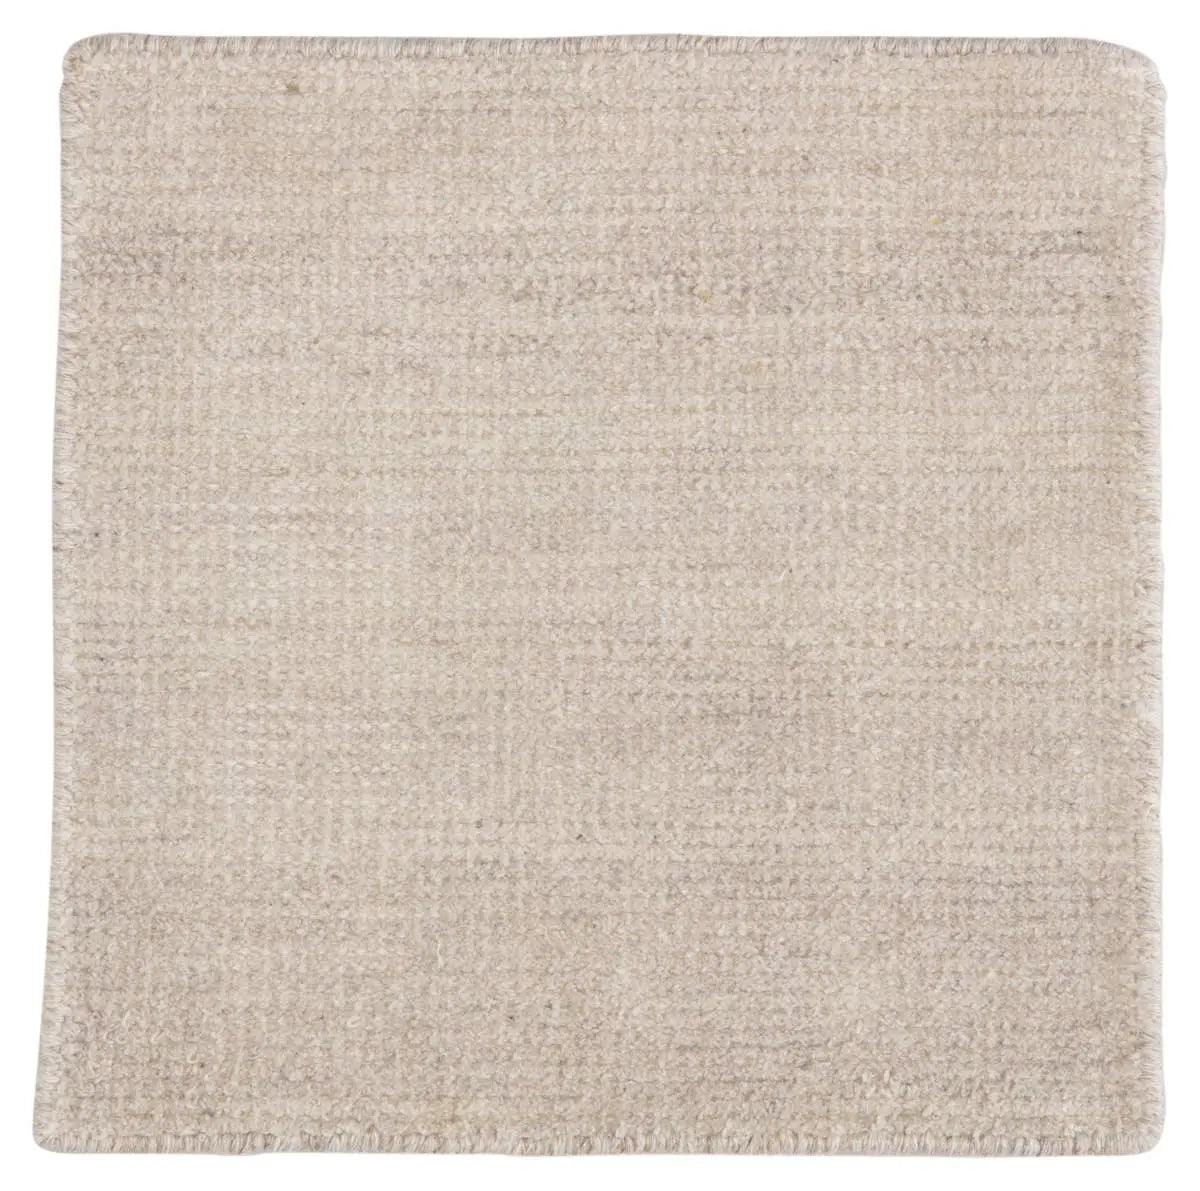 The eco-friendly Rebecca Light Gray Area Rug by Jaipur Living delivers a fresh accent to patios, kitchens, and dining rooms with its ultra-durable PET yarn hand-woven construction. The cream colorway with hints of brown lends a modern and sleek tone to any home.